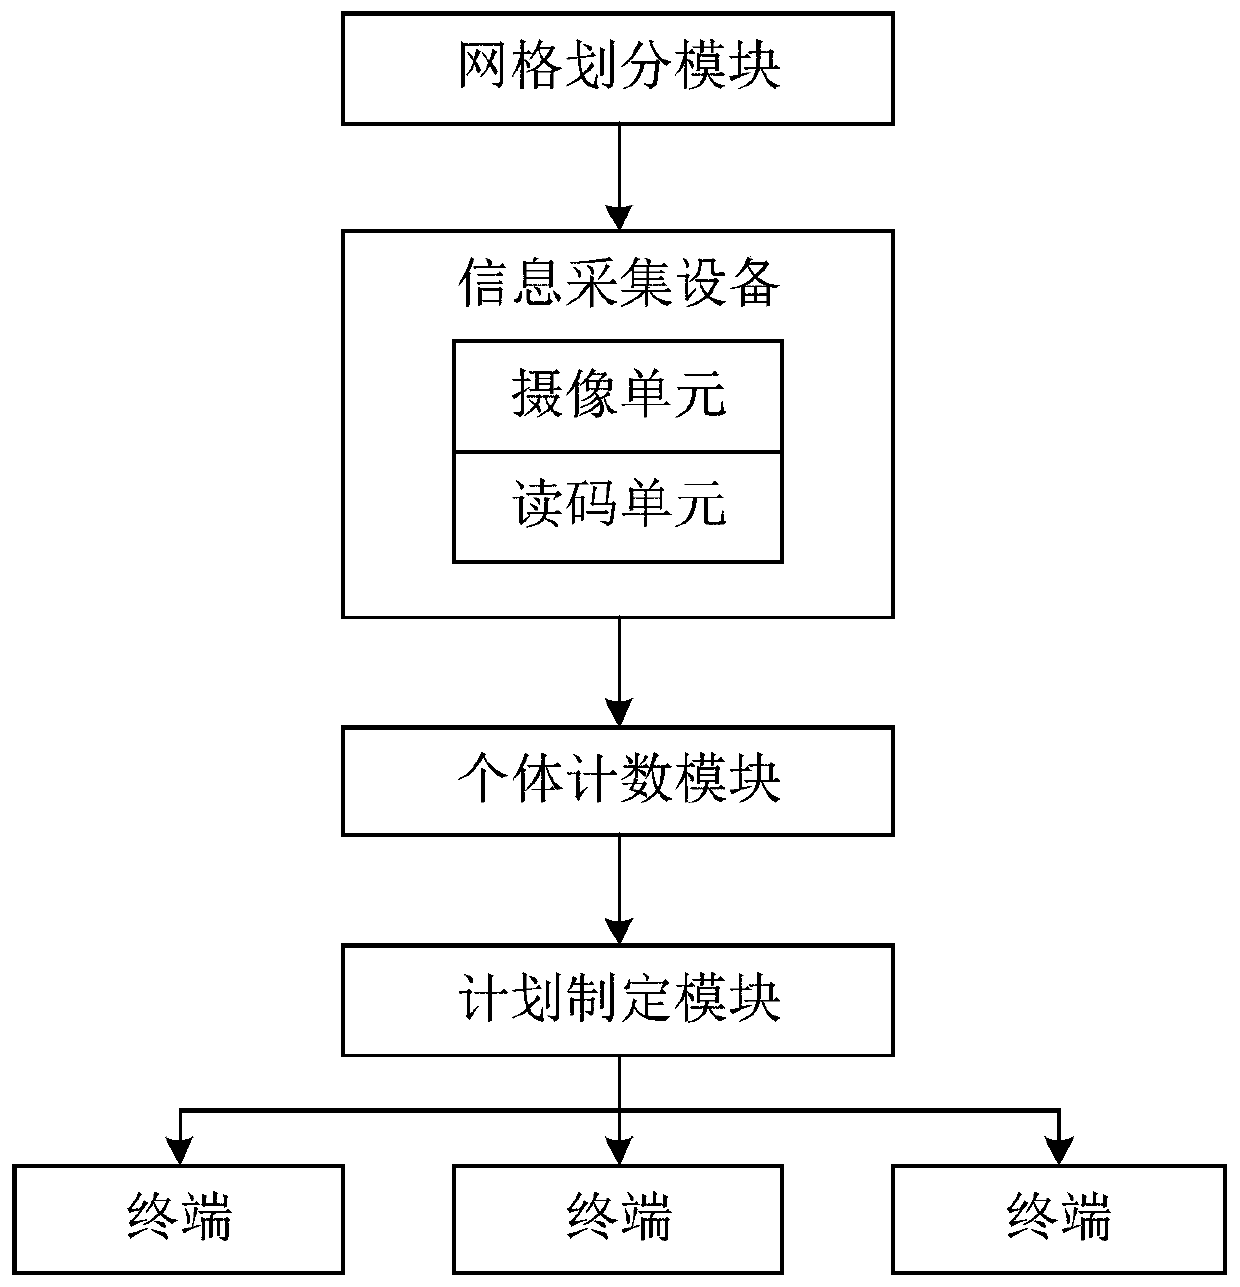 Community security personnel scheduling method based on gridding, and method